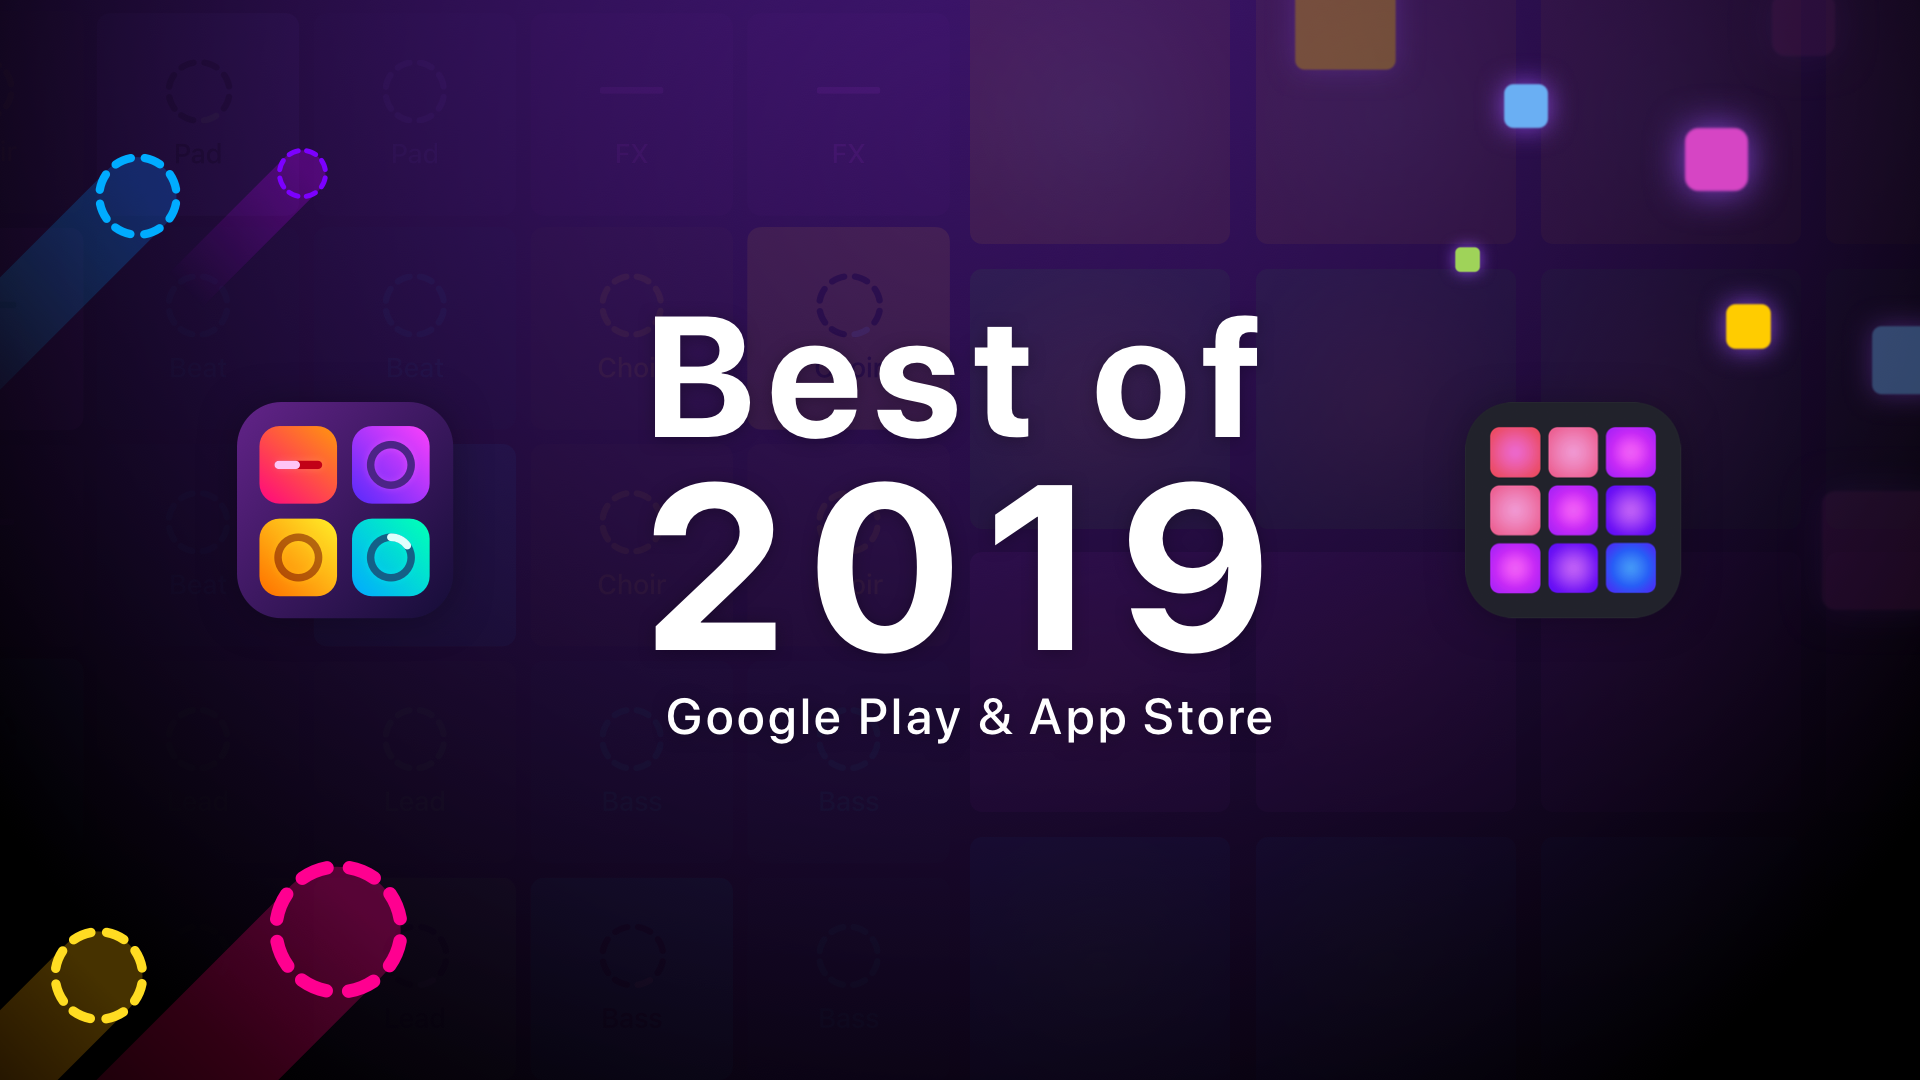 Easybrain’s music apps are featured in Best of 2019 on Google Play and the App Store